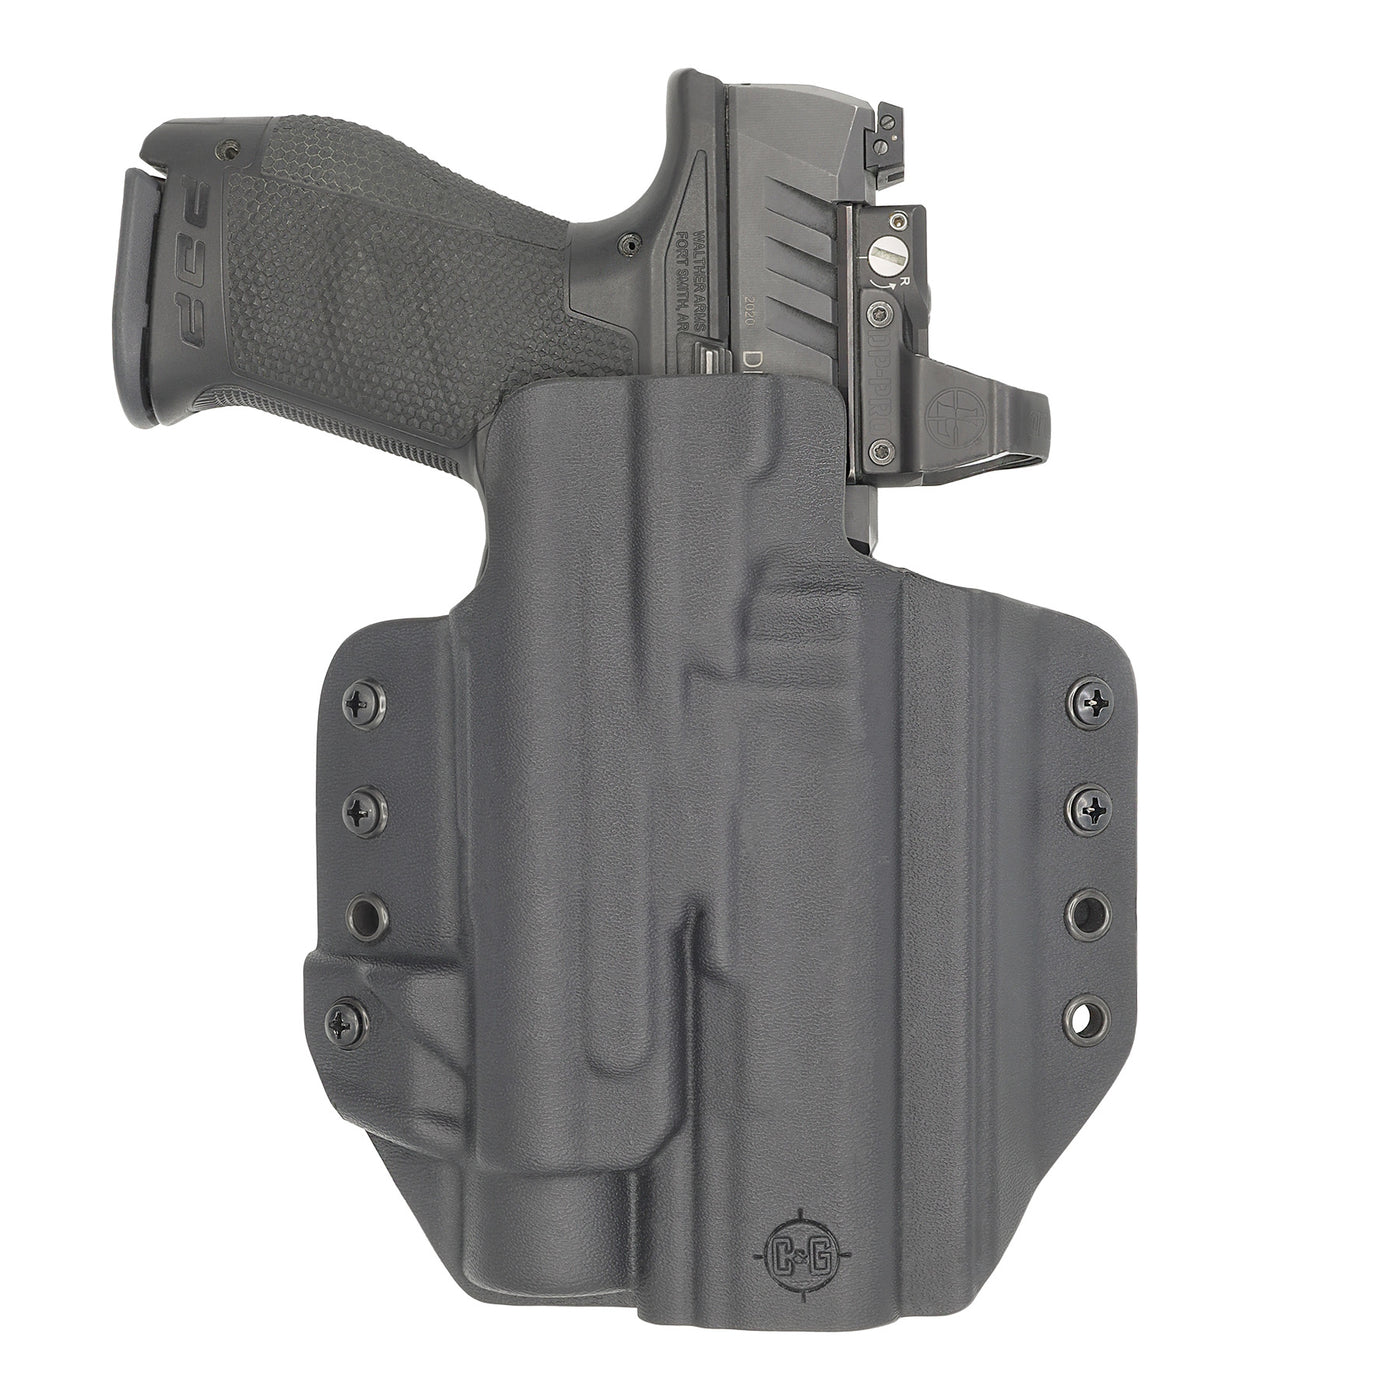 C&G Holsters Quickship OWB Tactical FN 509 Streamlight TLR1 in holstered position'